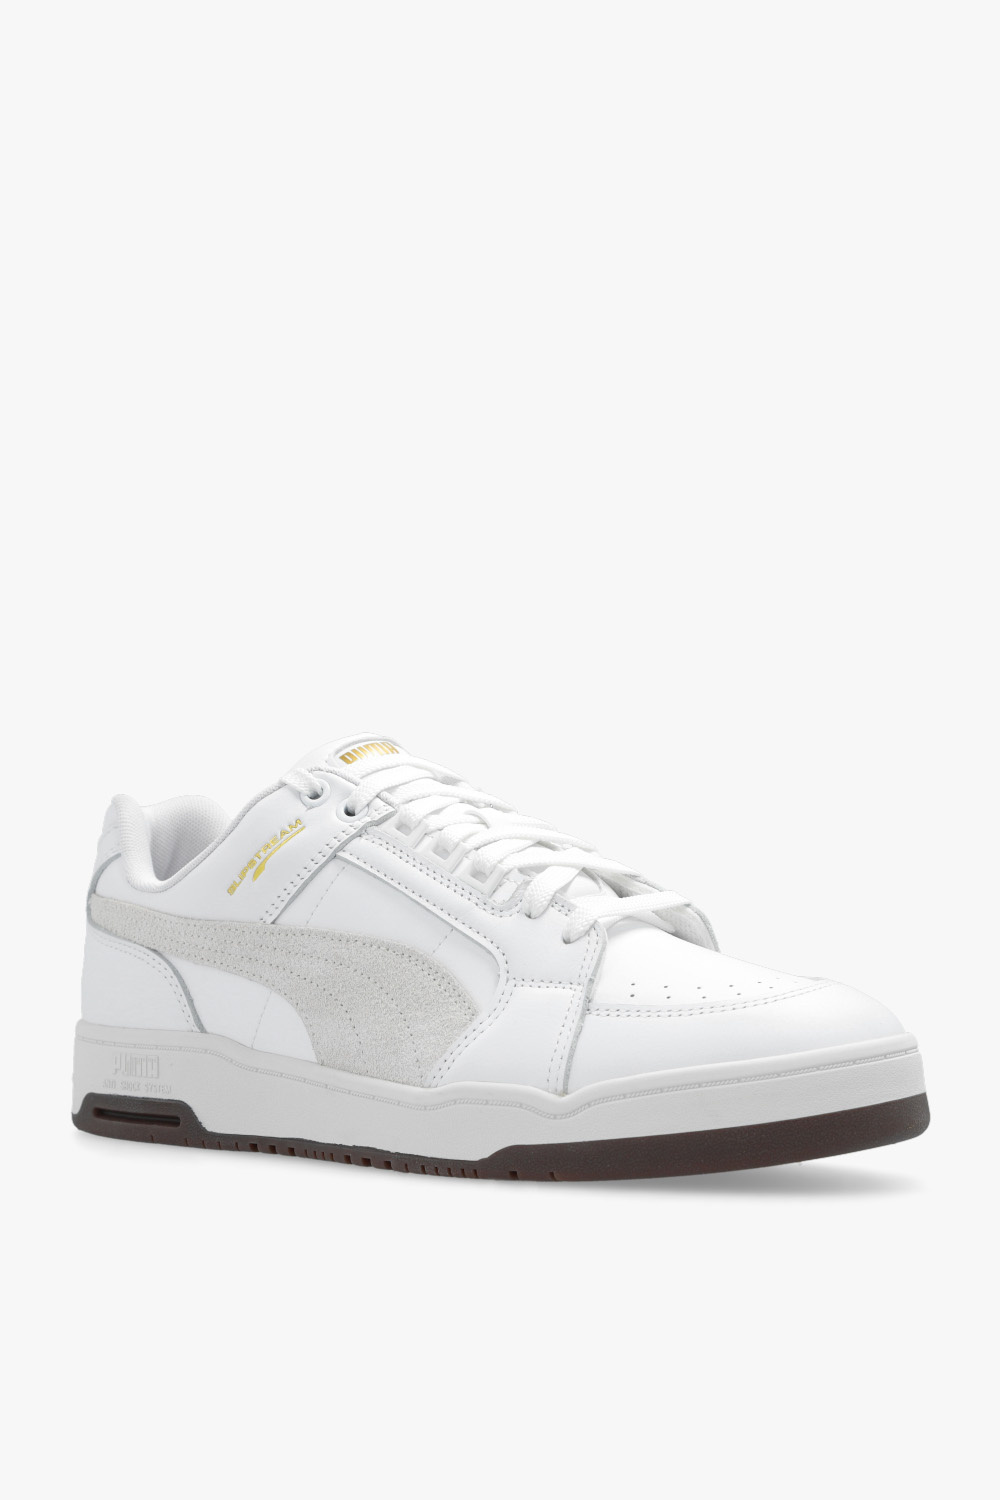 Puma ‘Slipstream Low Lux’ sneakers